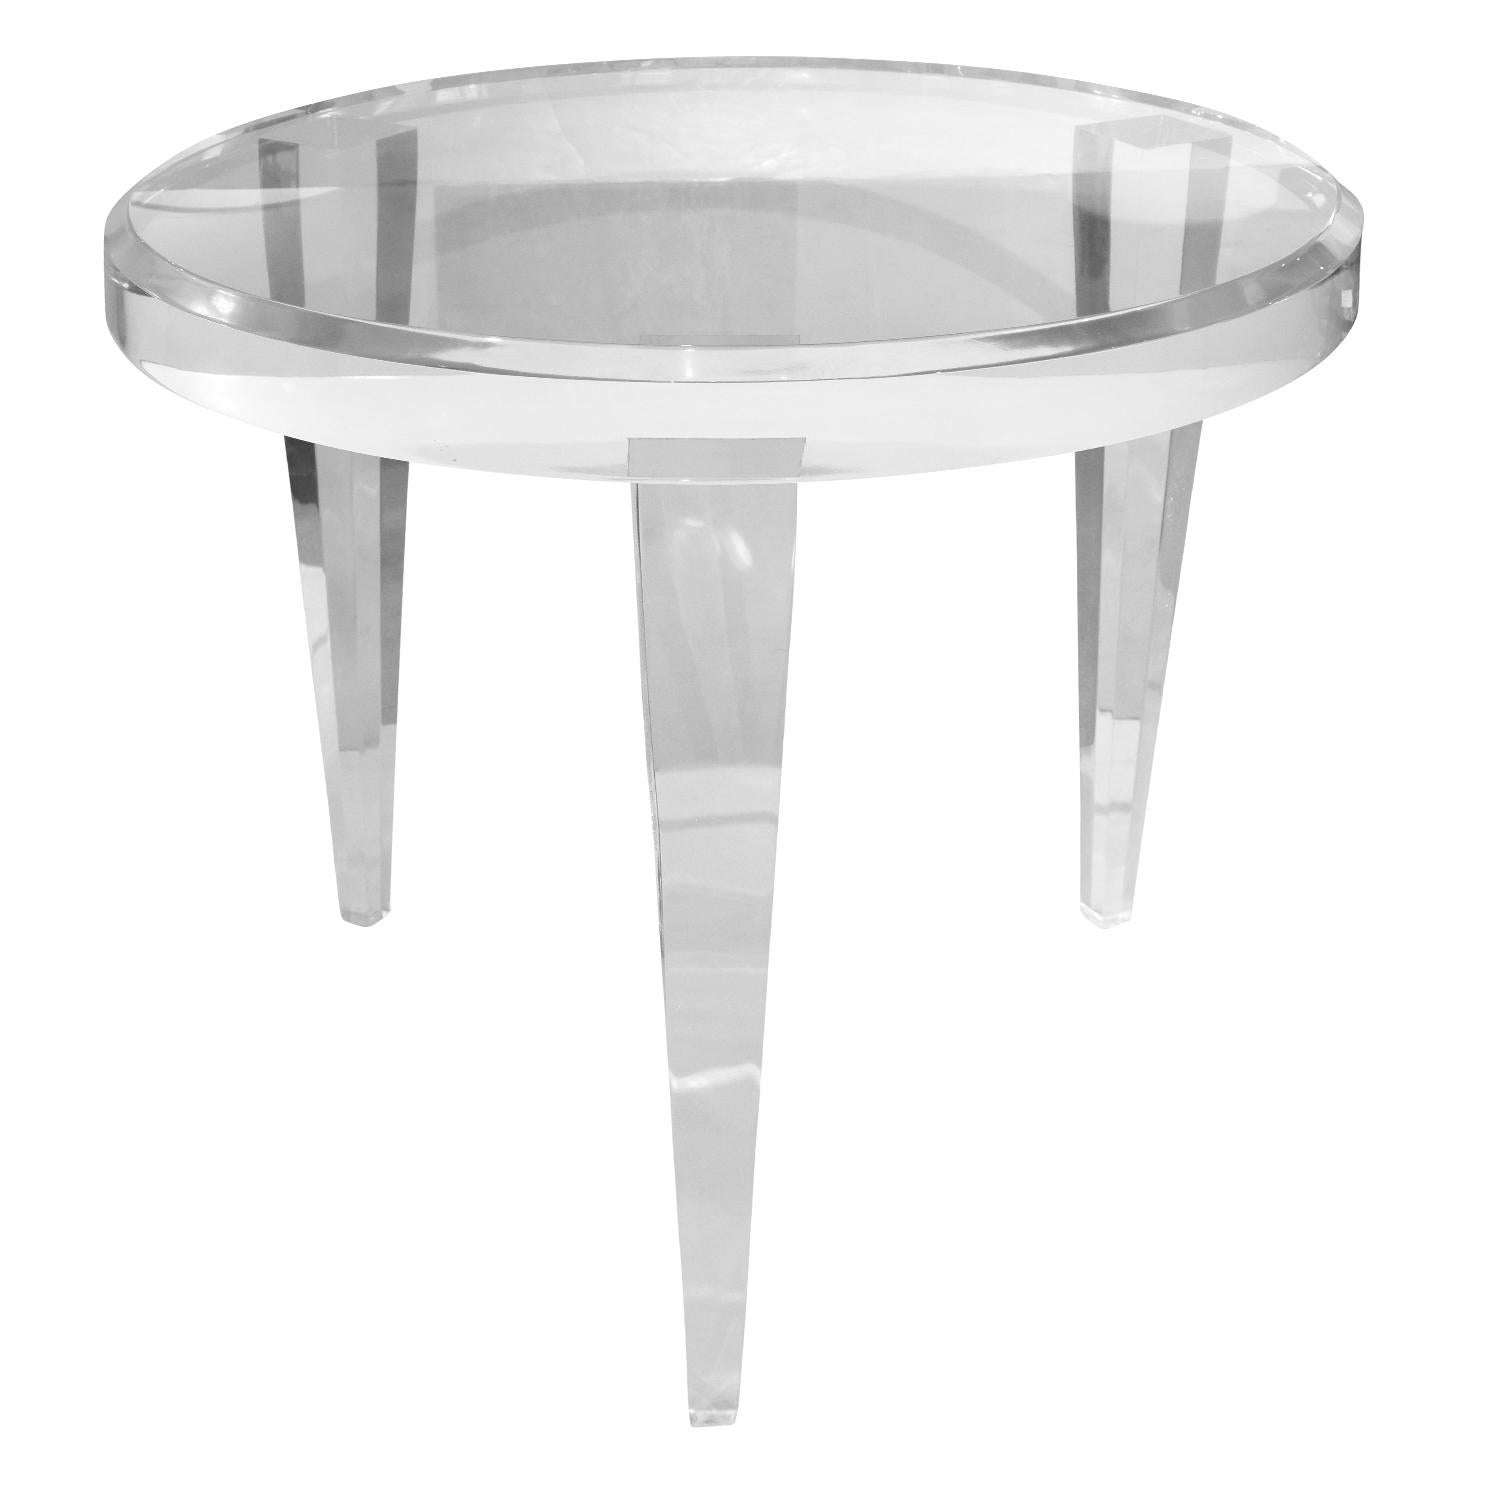 Pair of solid lucite end tables, round with tapering legs, custom design, American 1990's. These were custom made for a NYC apartment. They are beautifully made.